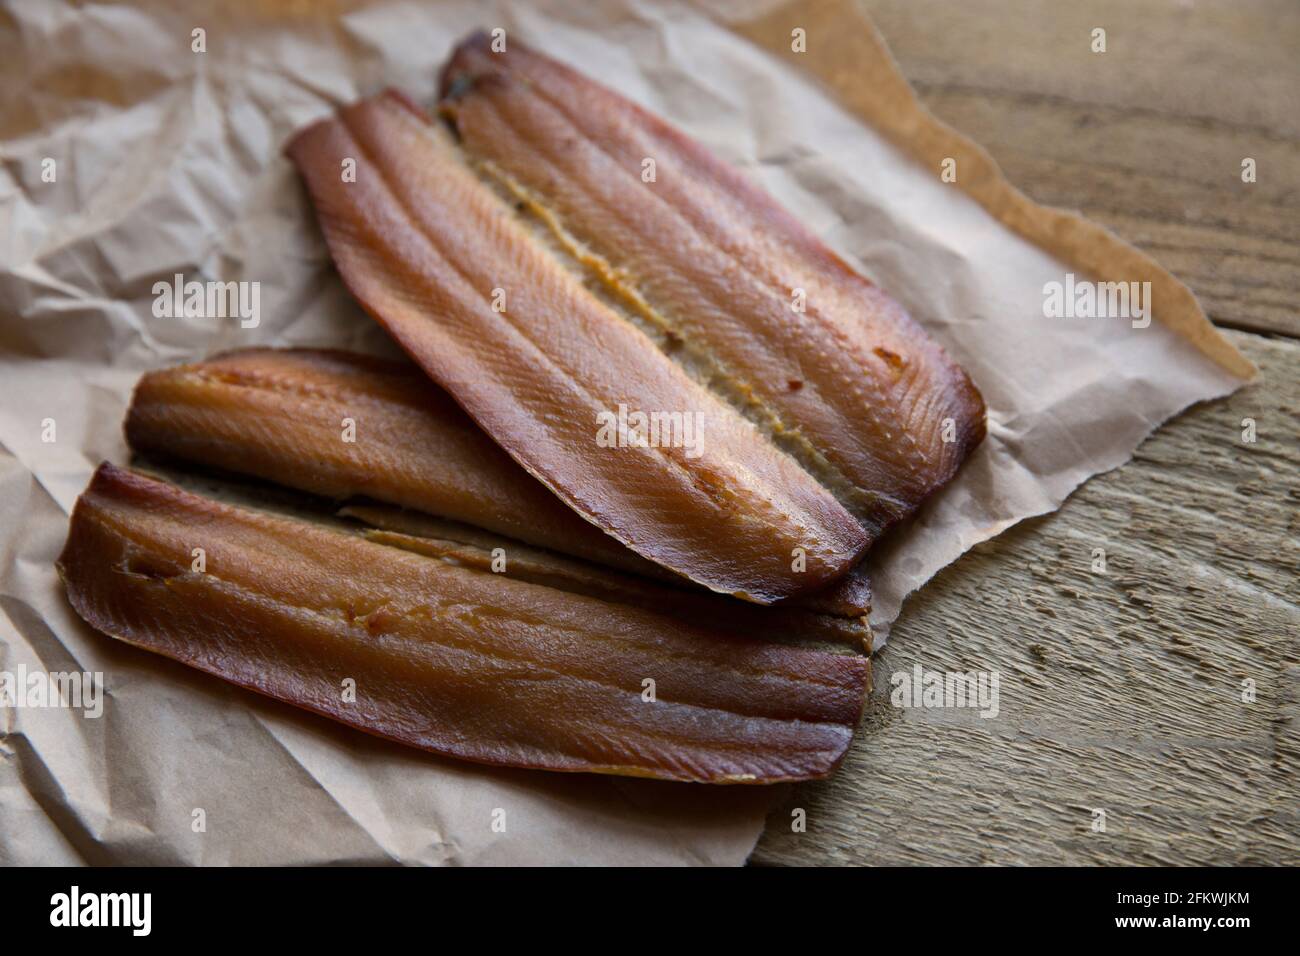 Smoked Craster kipper cutlets presented on a wooden background. Kippers are smoked herrings and are rich in fish oils. England UK GB Stock Photo